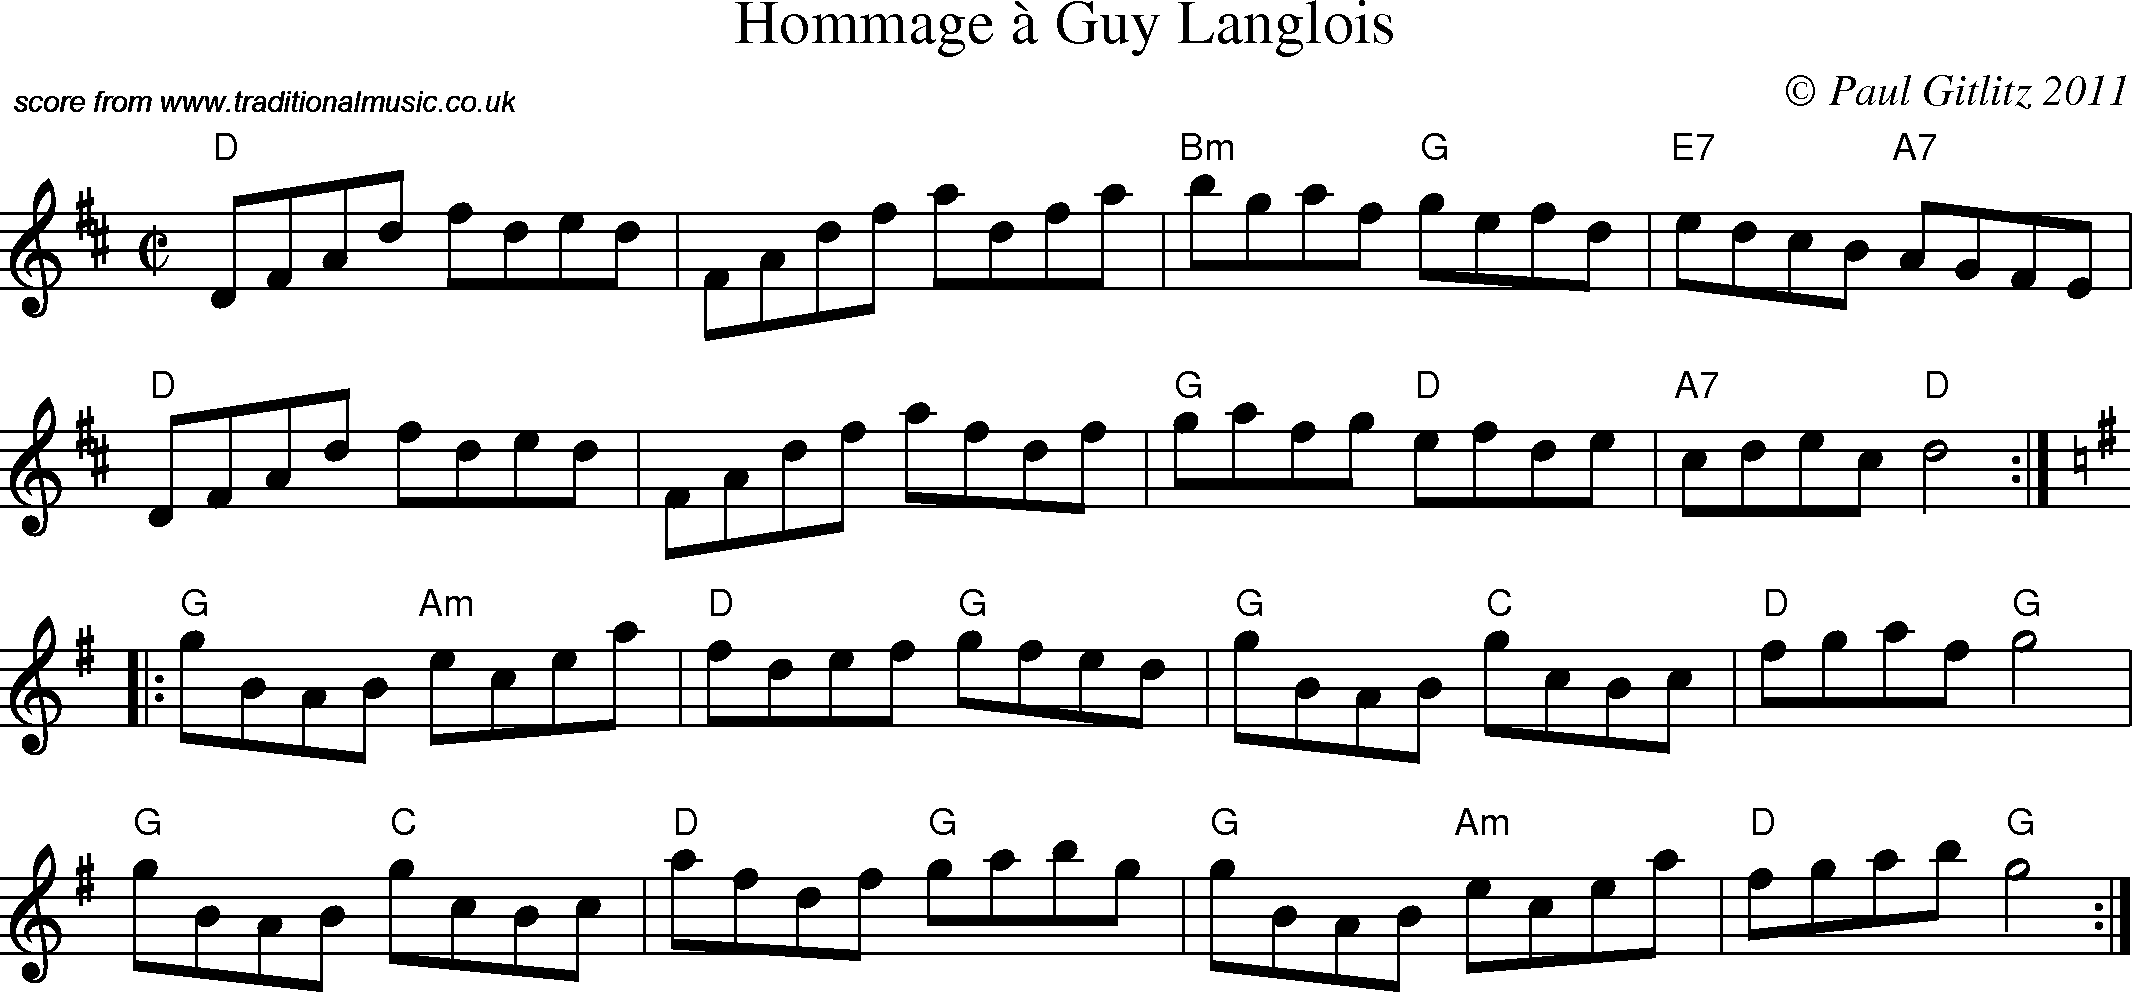 Sheet Music Score for Reel - Hommage a Guy Langlois